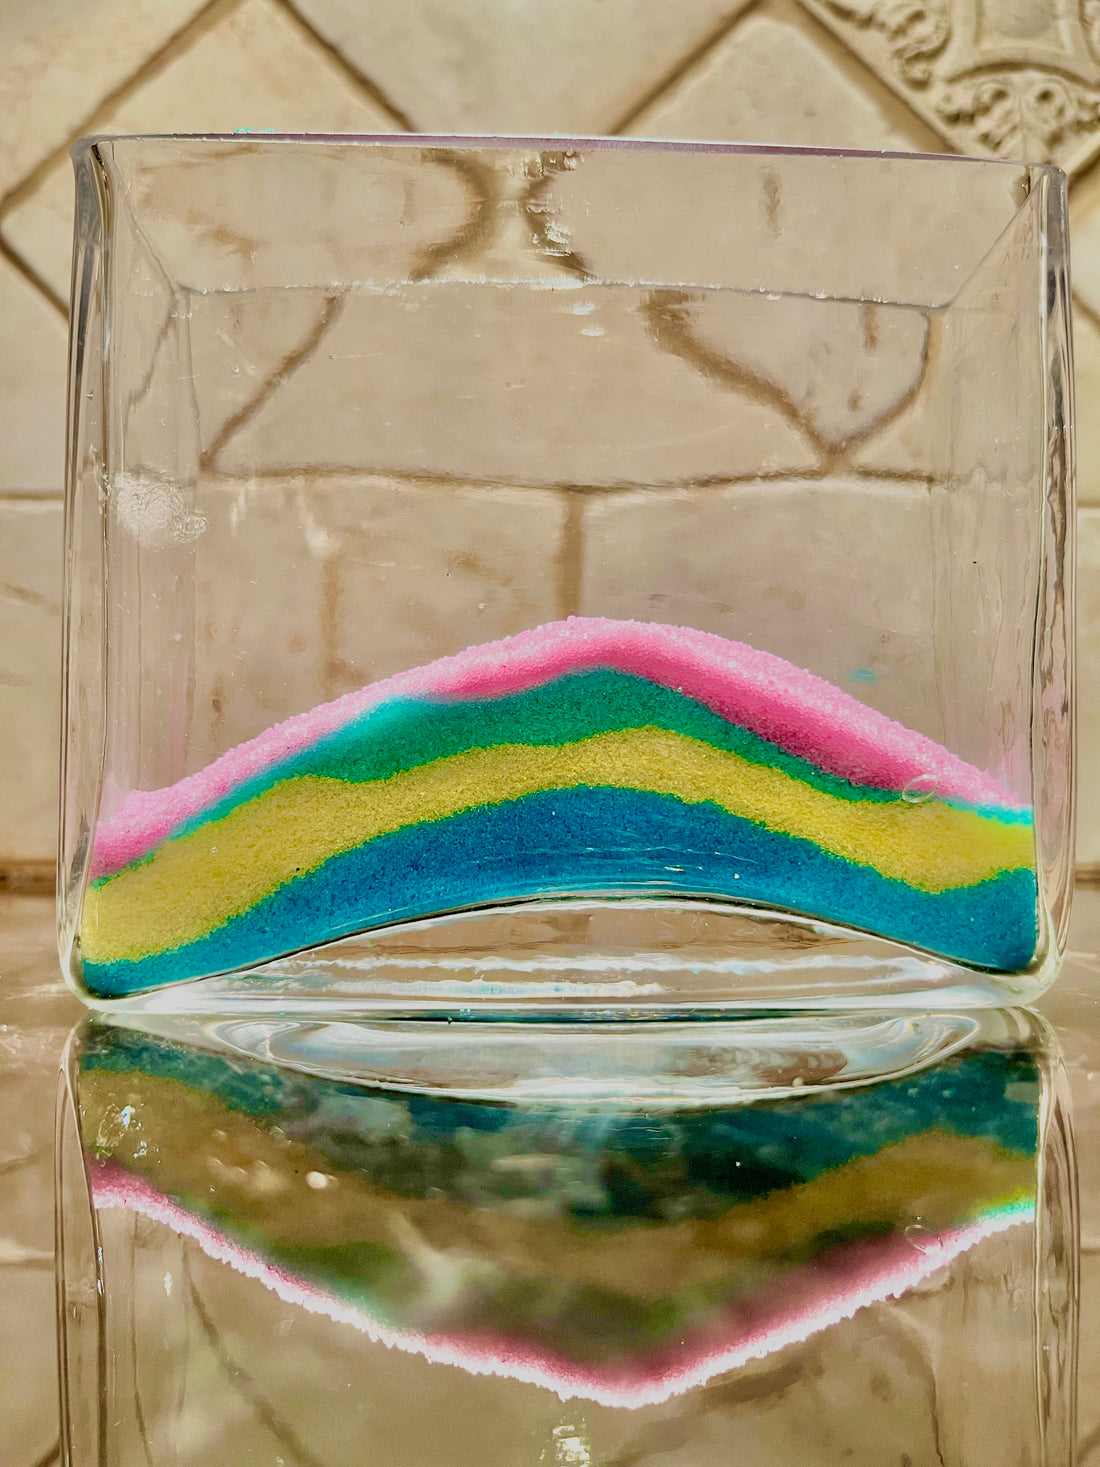 Creating Stunning Layered Colorful Sand Art with Dyed Salt